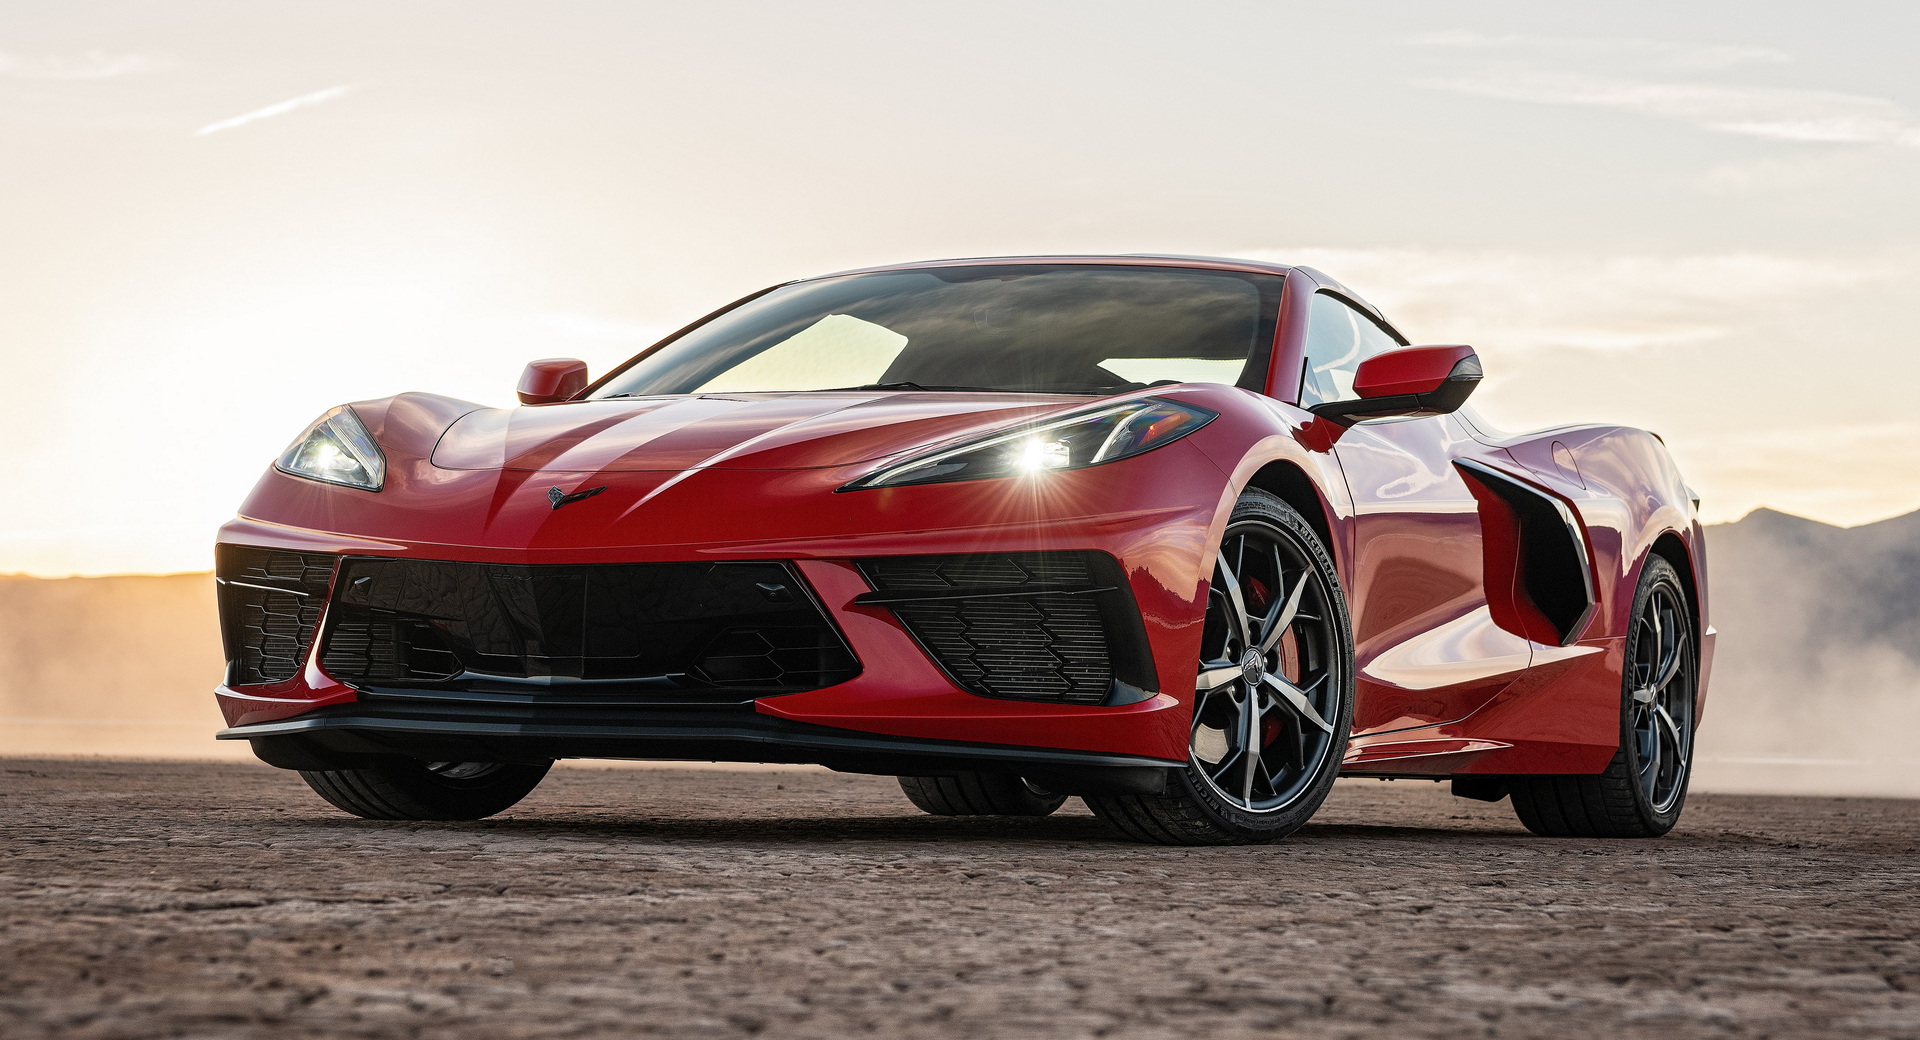 GM stops production of the Corvette C8 again due to a supply problem